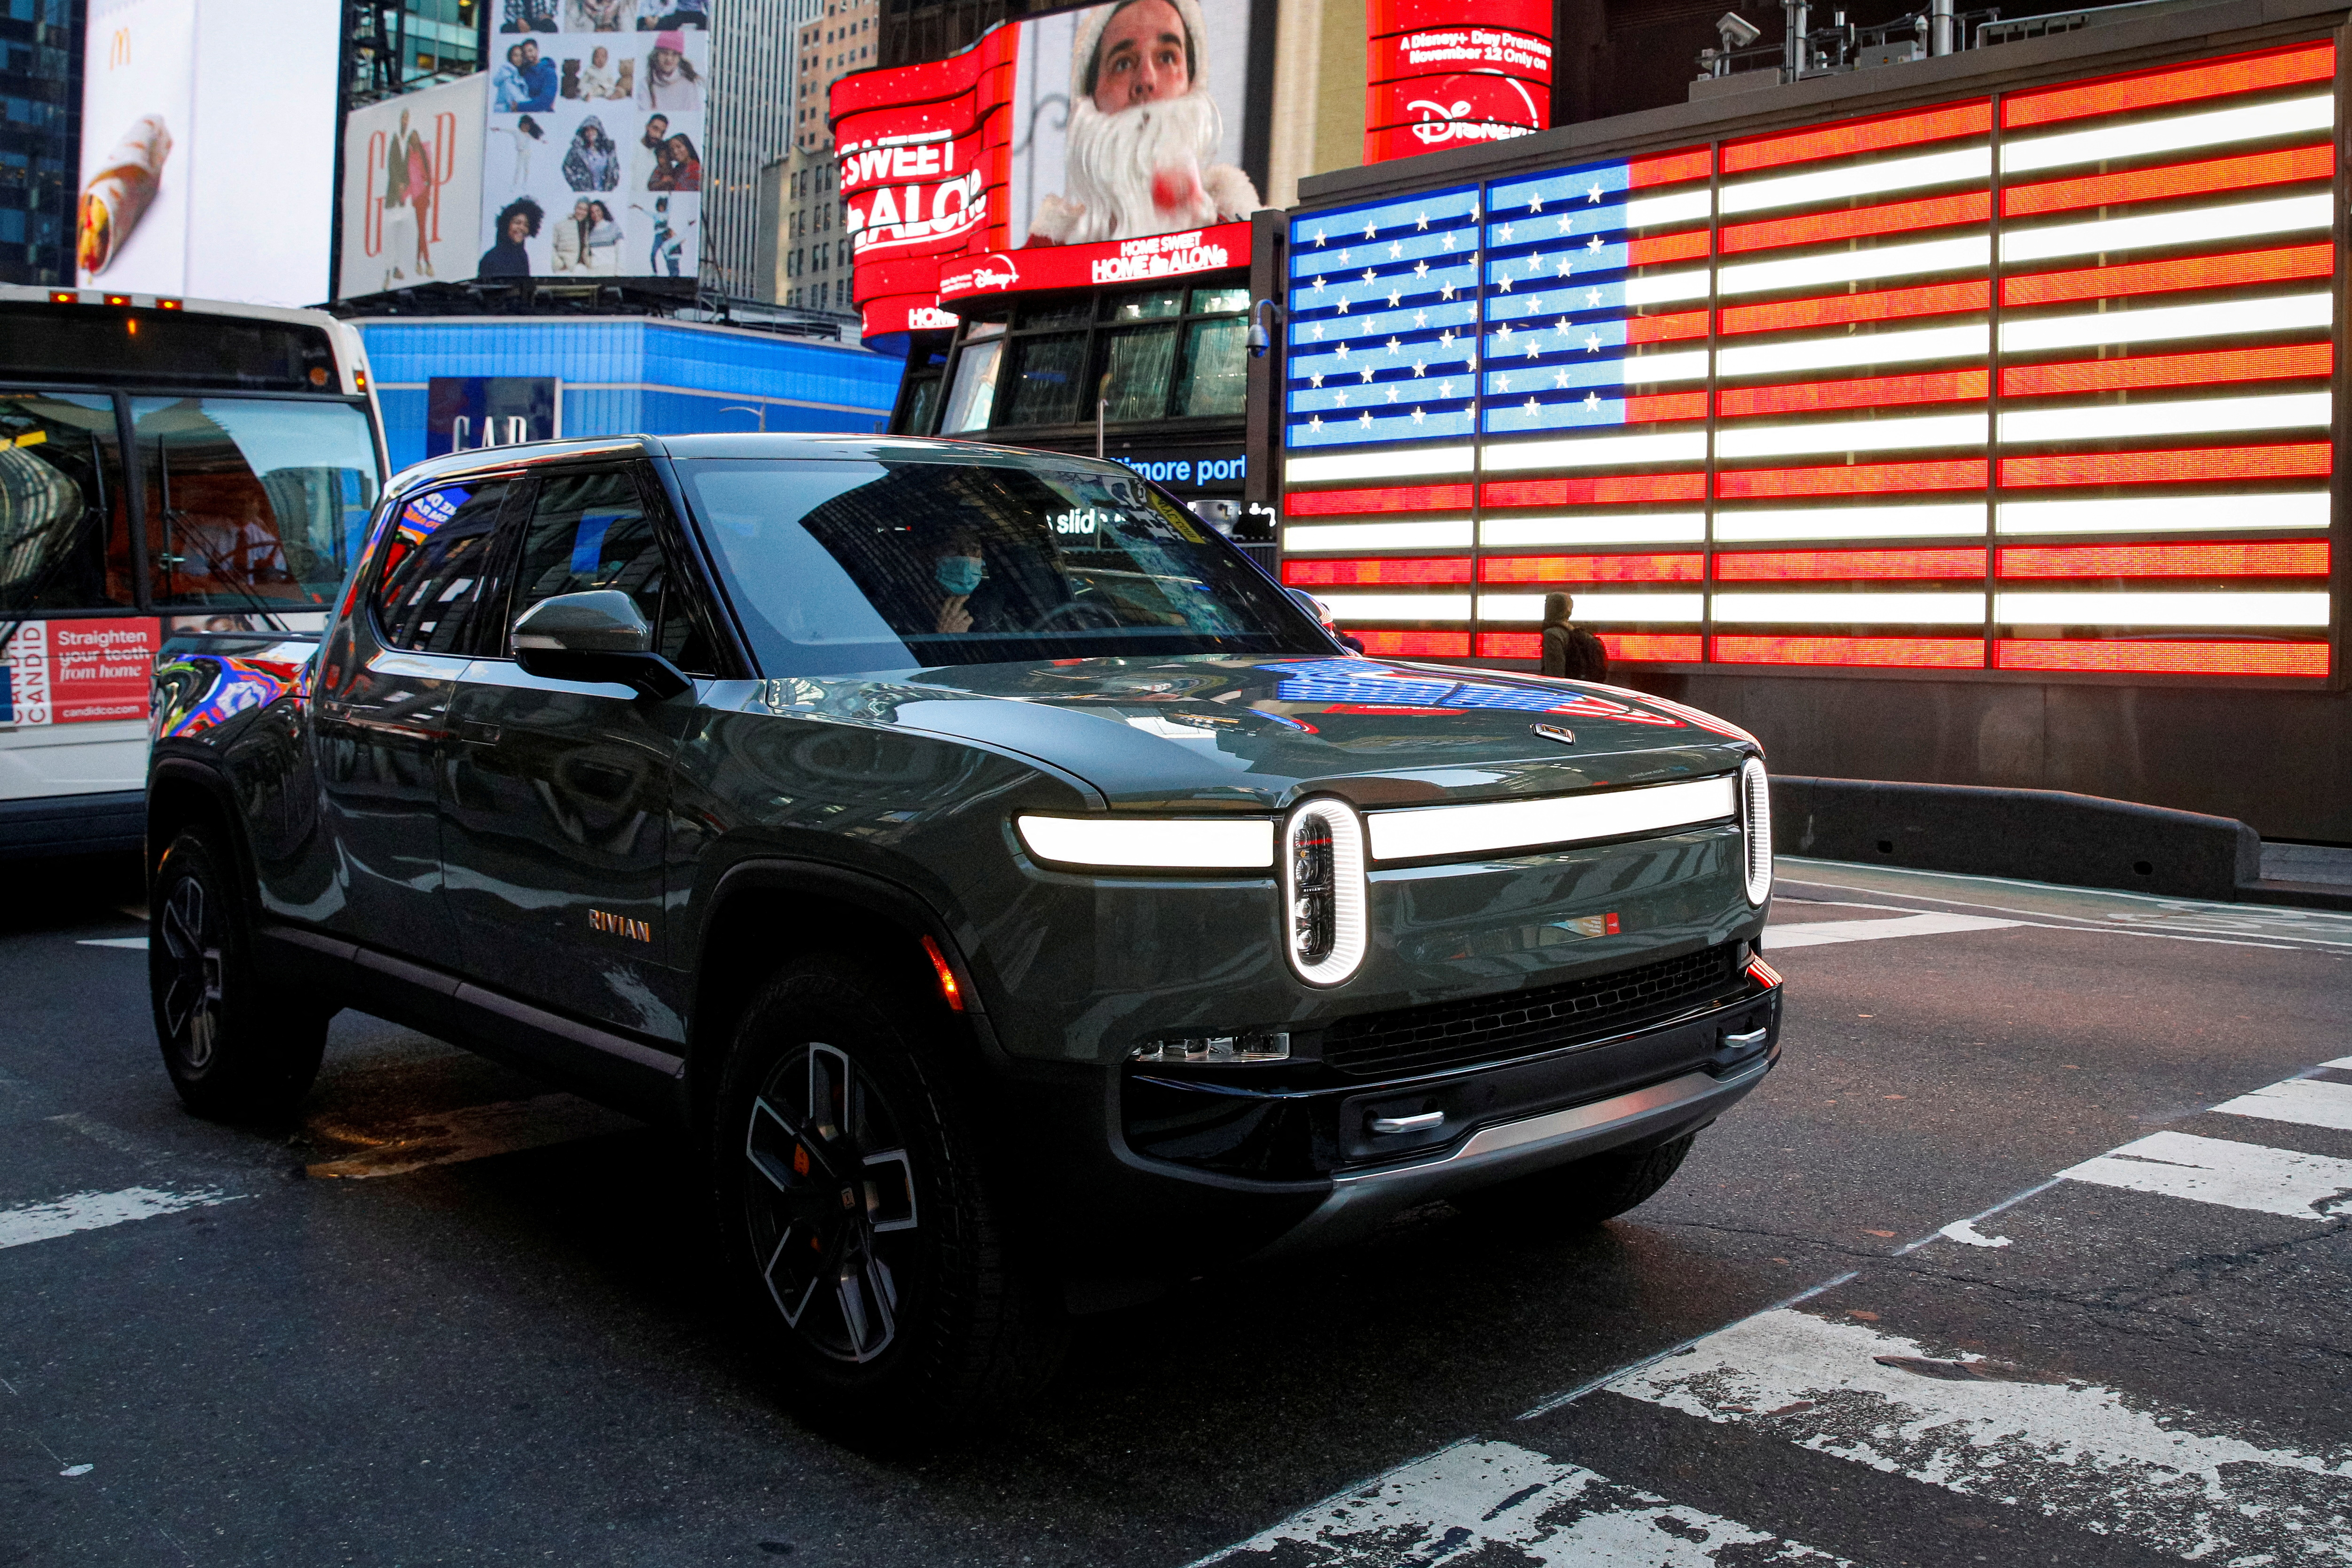 A Rivian R1T pickup, the Amazon-backed electric vehicle (EV) maker, is driven through Times Square during the company’s IPO in New York